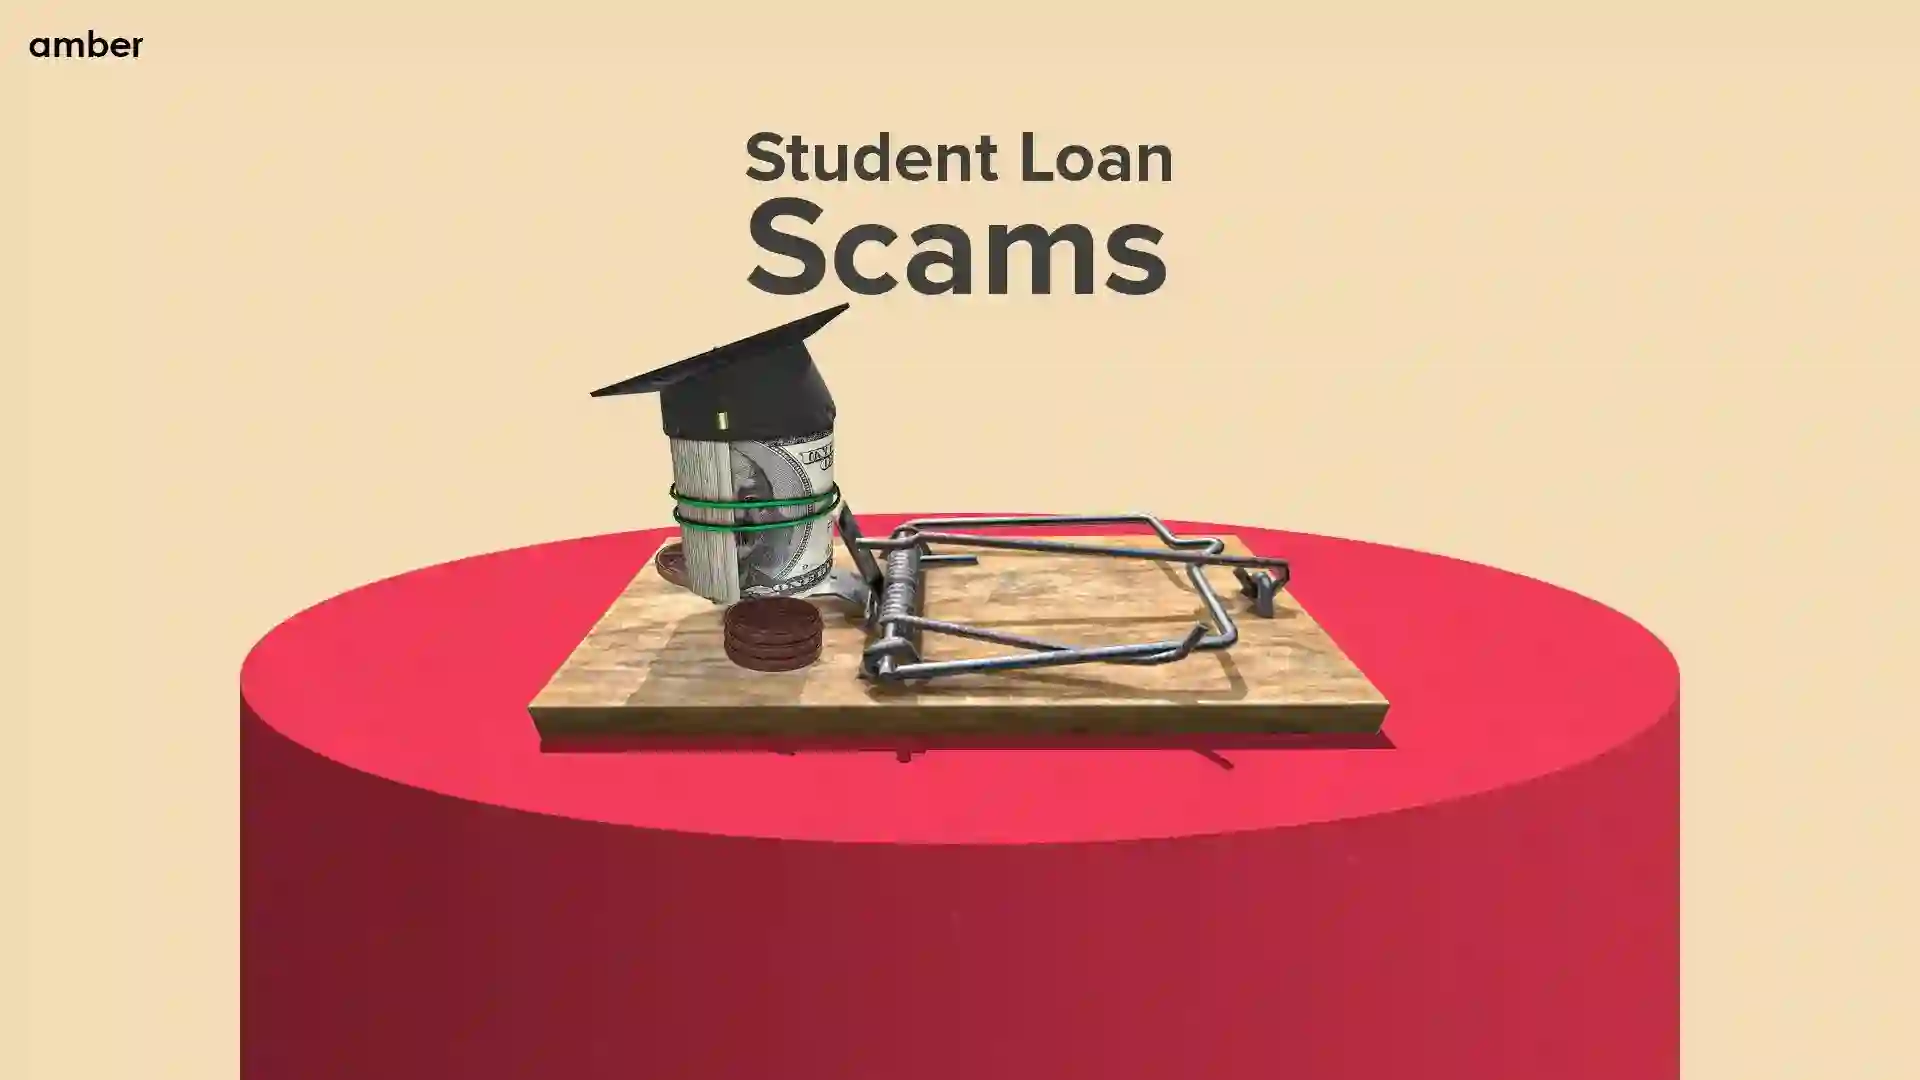 Student Debt Relief Plan Scams [Photo: Amber]